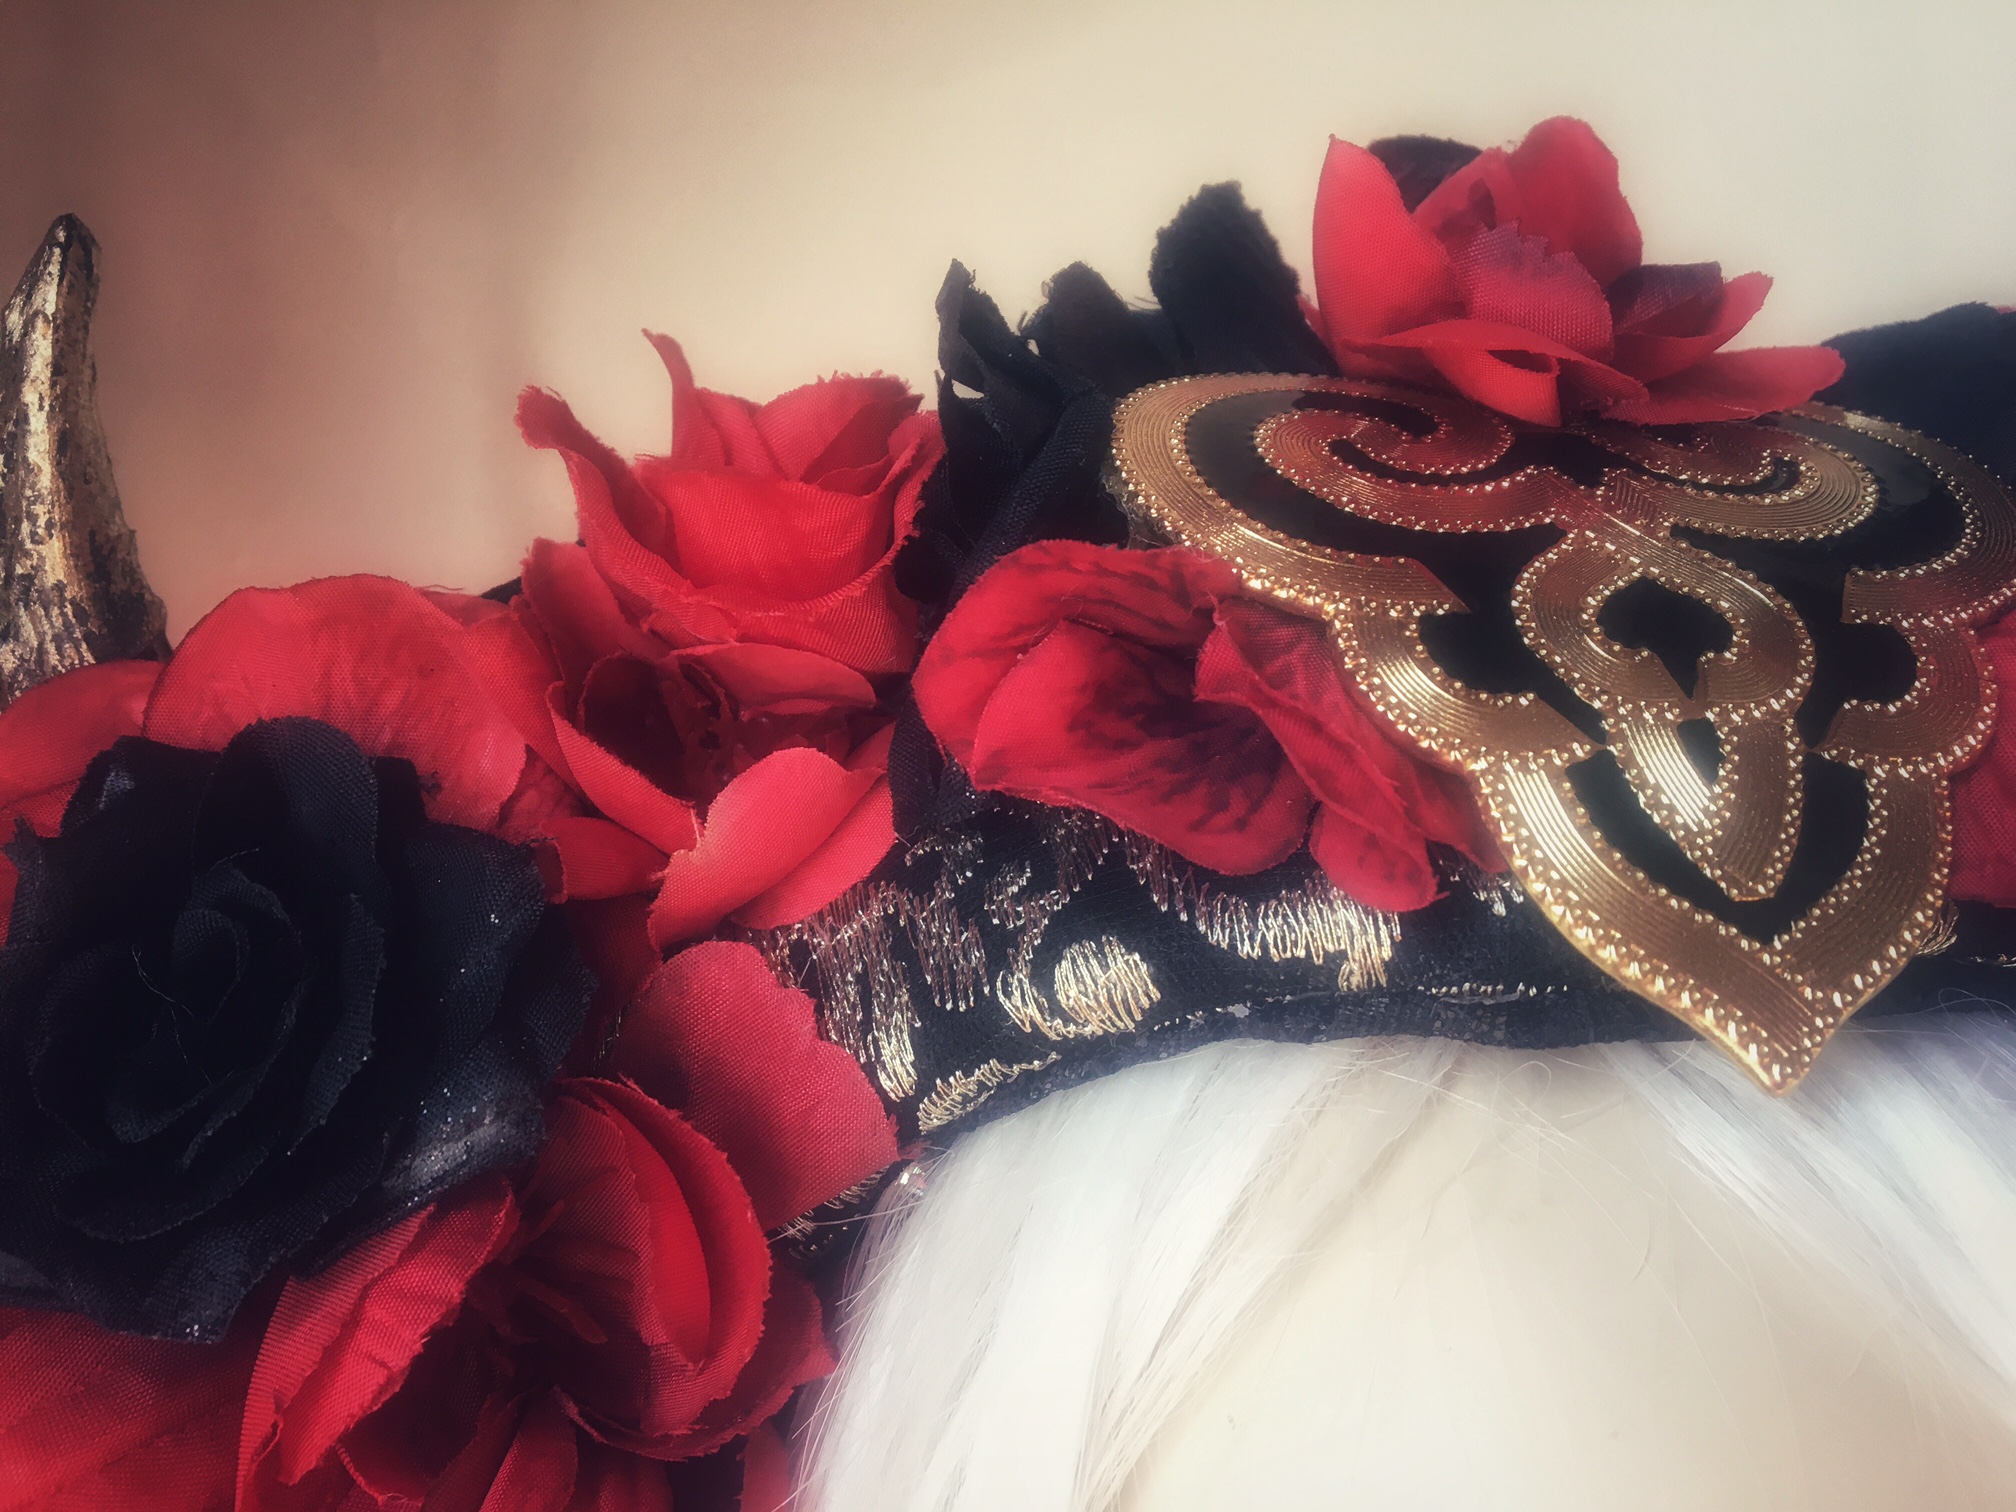 Rose Gold Wings & Roses Headdress - Serpentfeathers